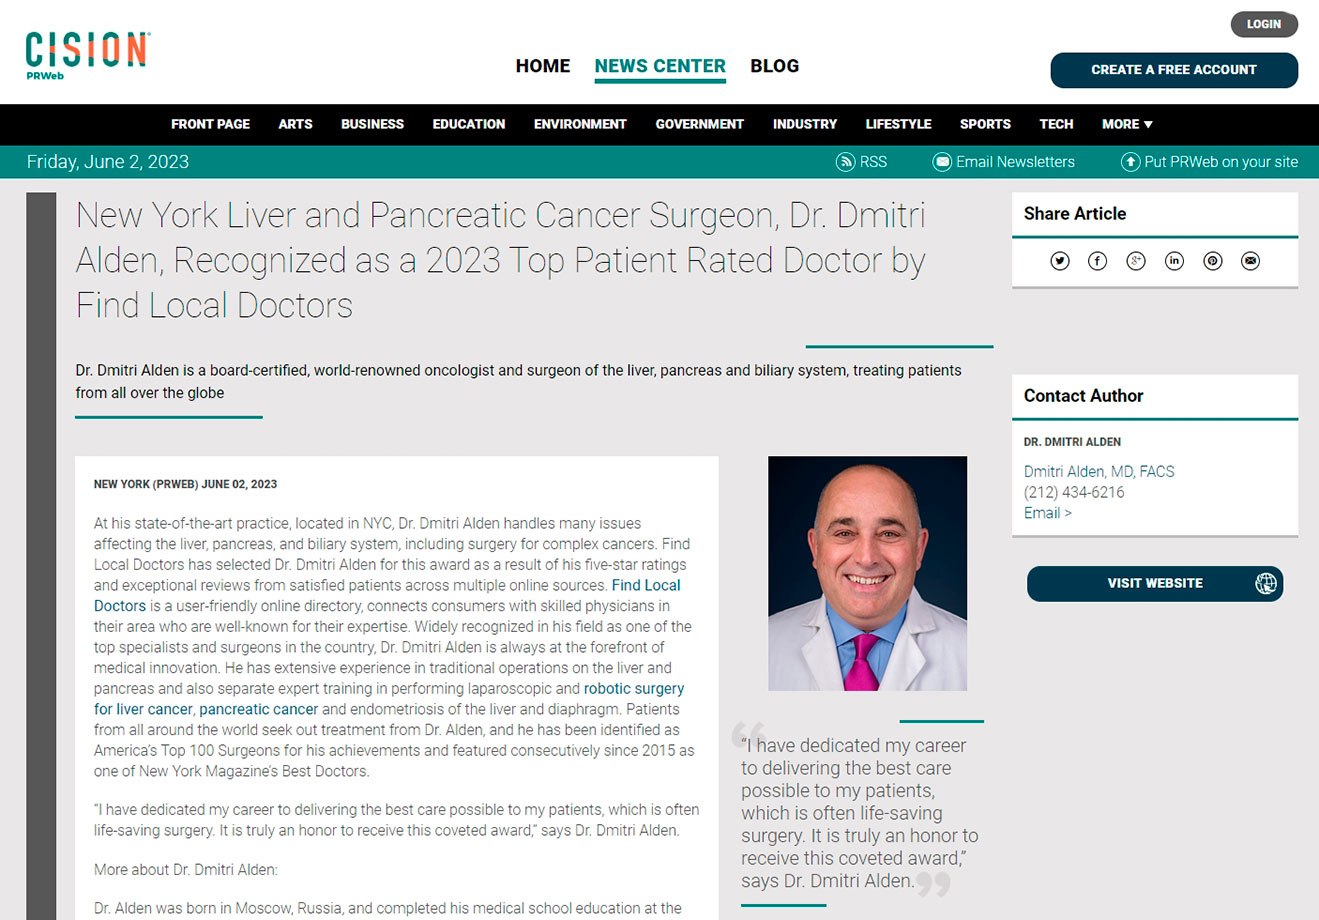 screenshot of the article titled: New York Liver and Pancreatic Cancer Surgeon, Dr. Dmitri Alden, Recognized as a 2023 Top Patient Rated Doctor by Find Local Doctors